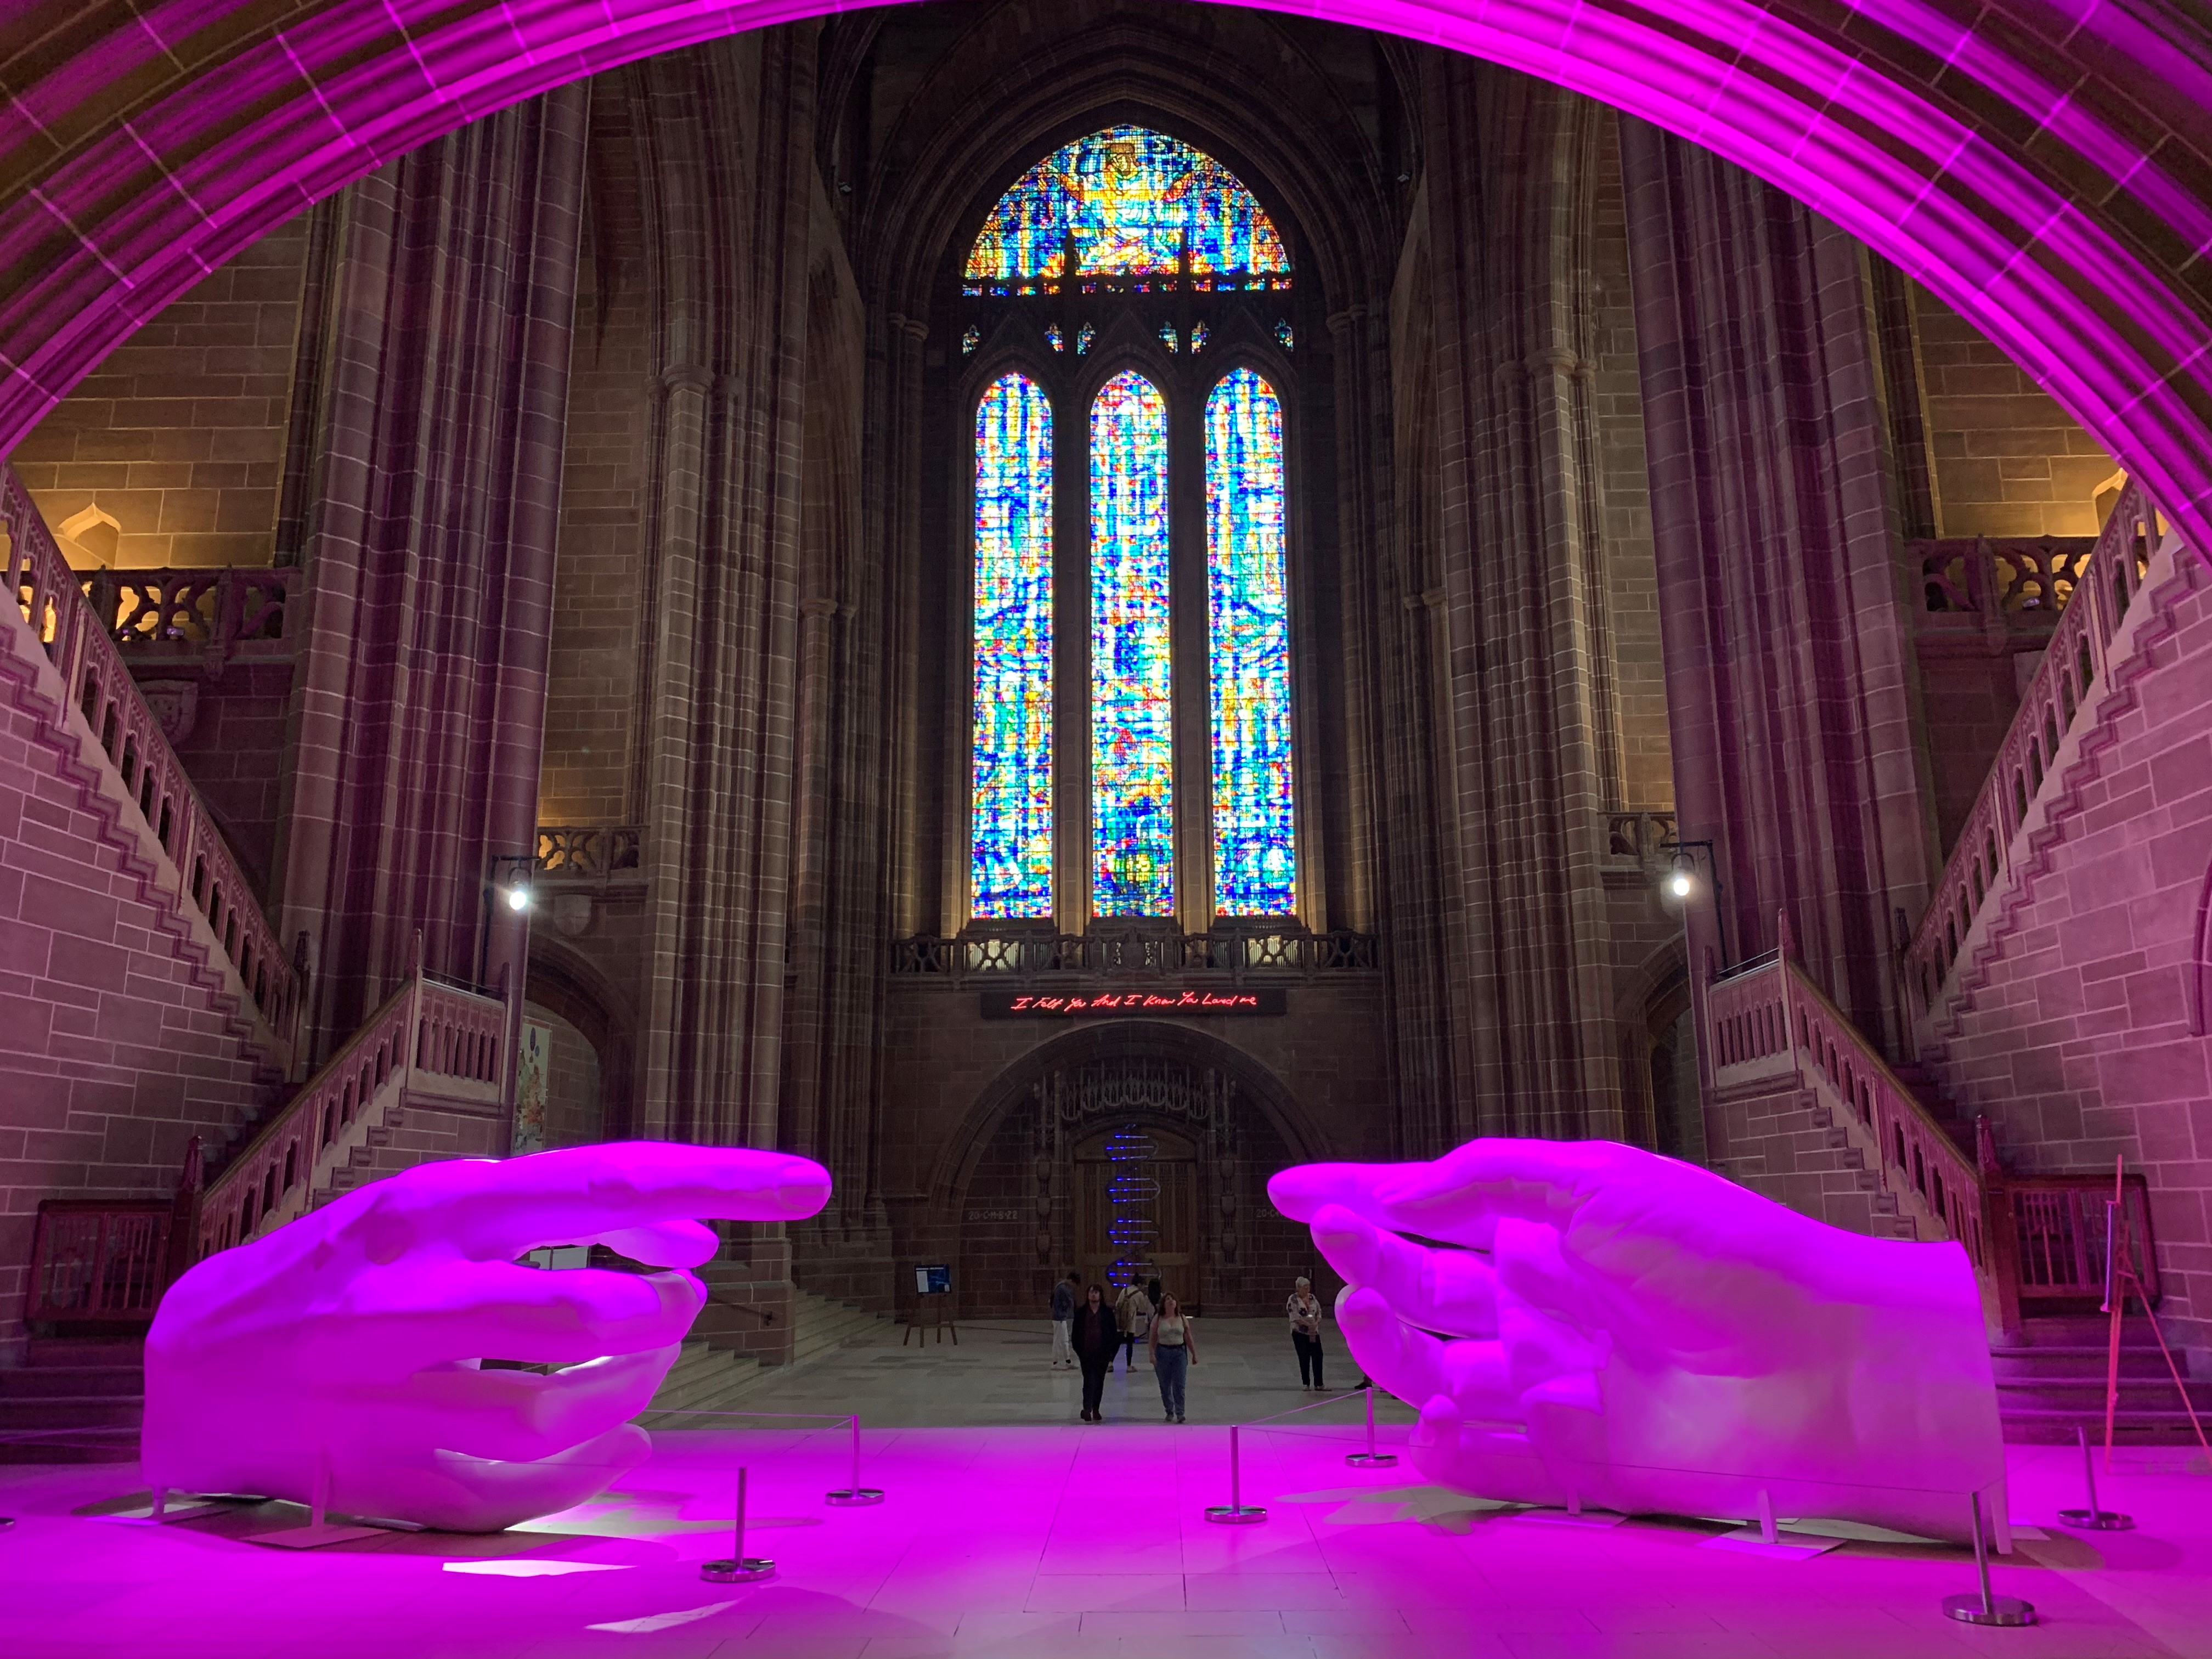 The inside of a large sandston cathedral.  A sculpture is centre-stage of two huge female hands with their forefingers reaching towards each other to make contact.  The scene is lit with a wash of purple light.